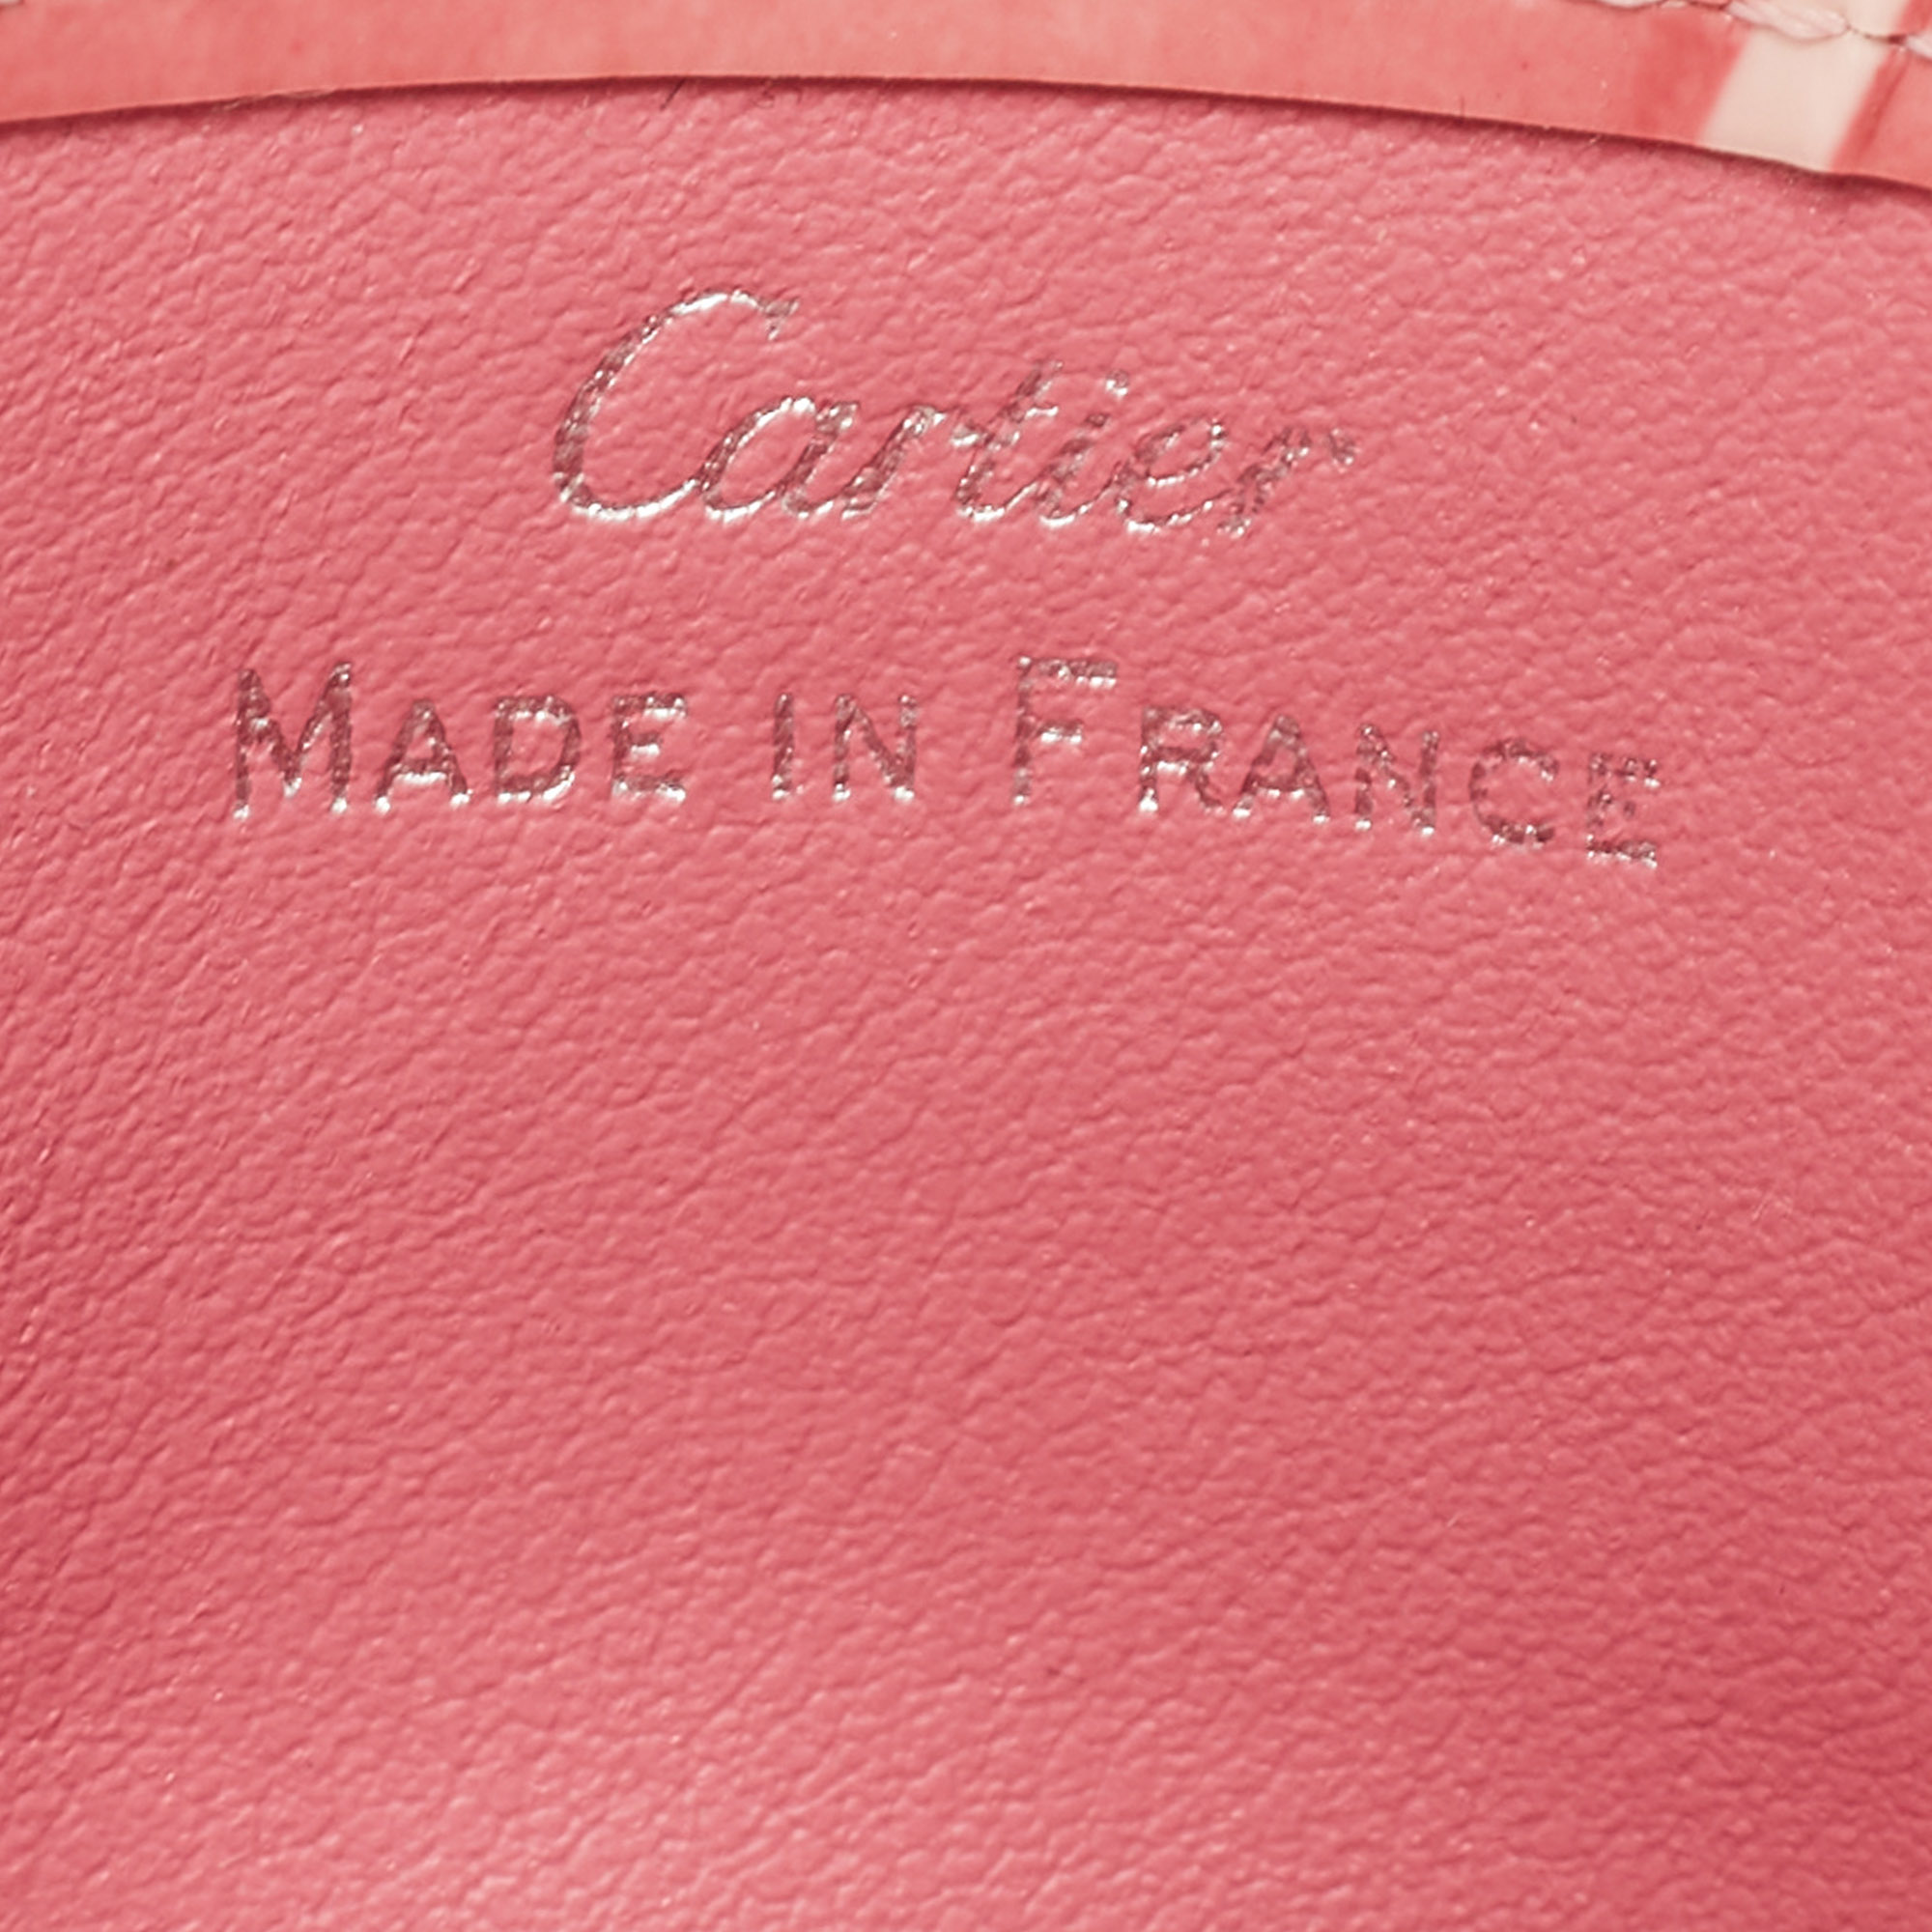 Cartier Pink Patent Leather Happy Birthday Card Holder